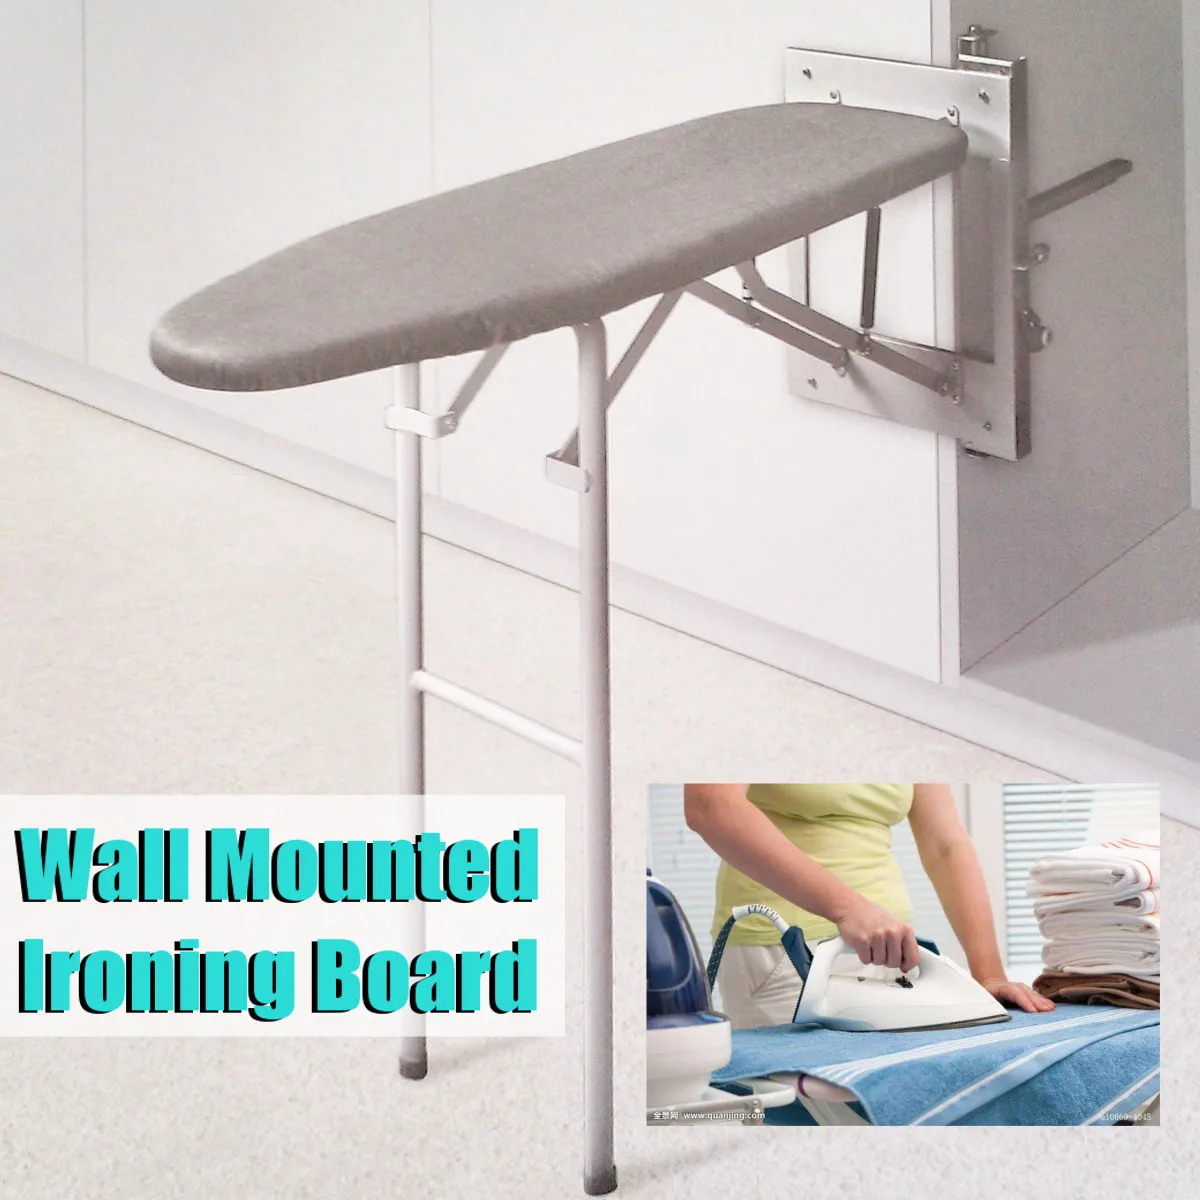 

Wall Mounted Ironing Board Space Saving Solution Laundry or Kitchen Home Tool